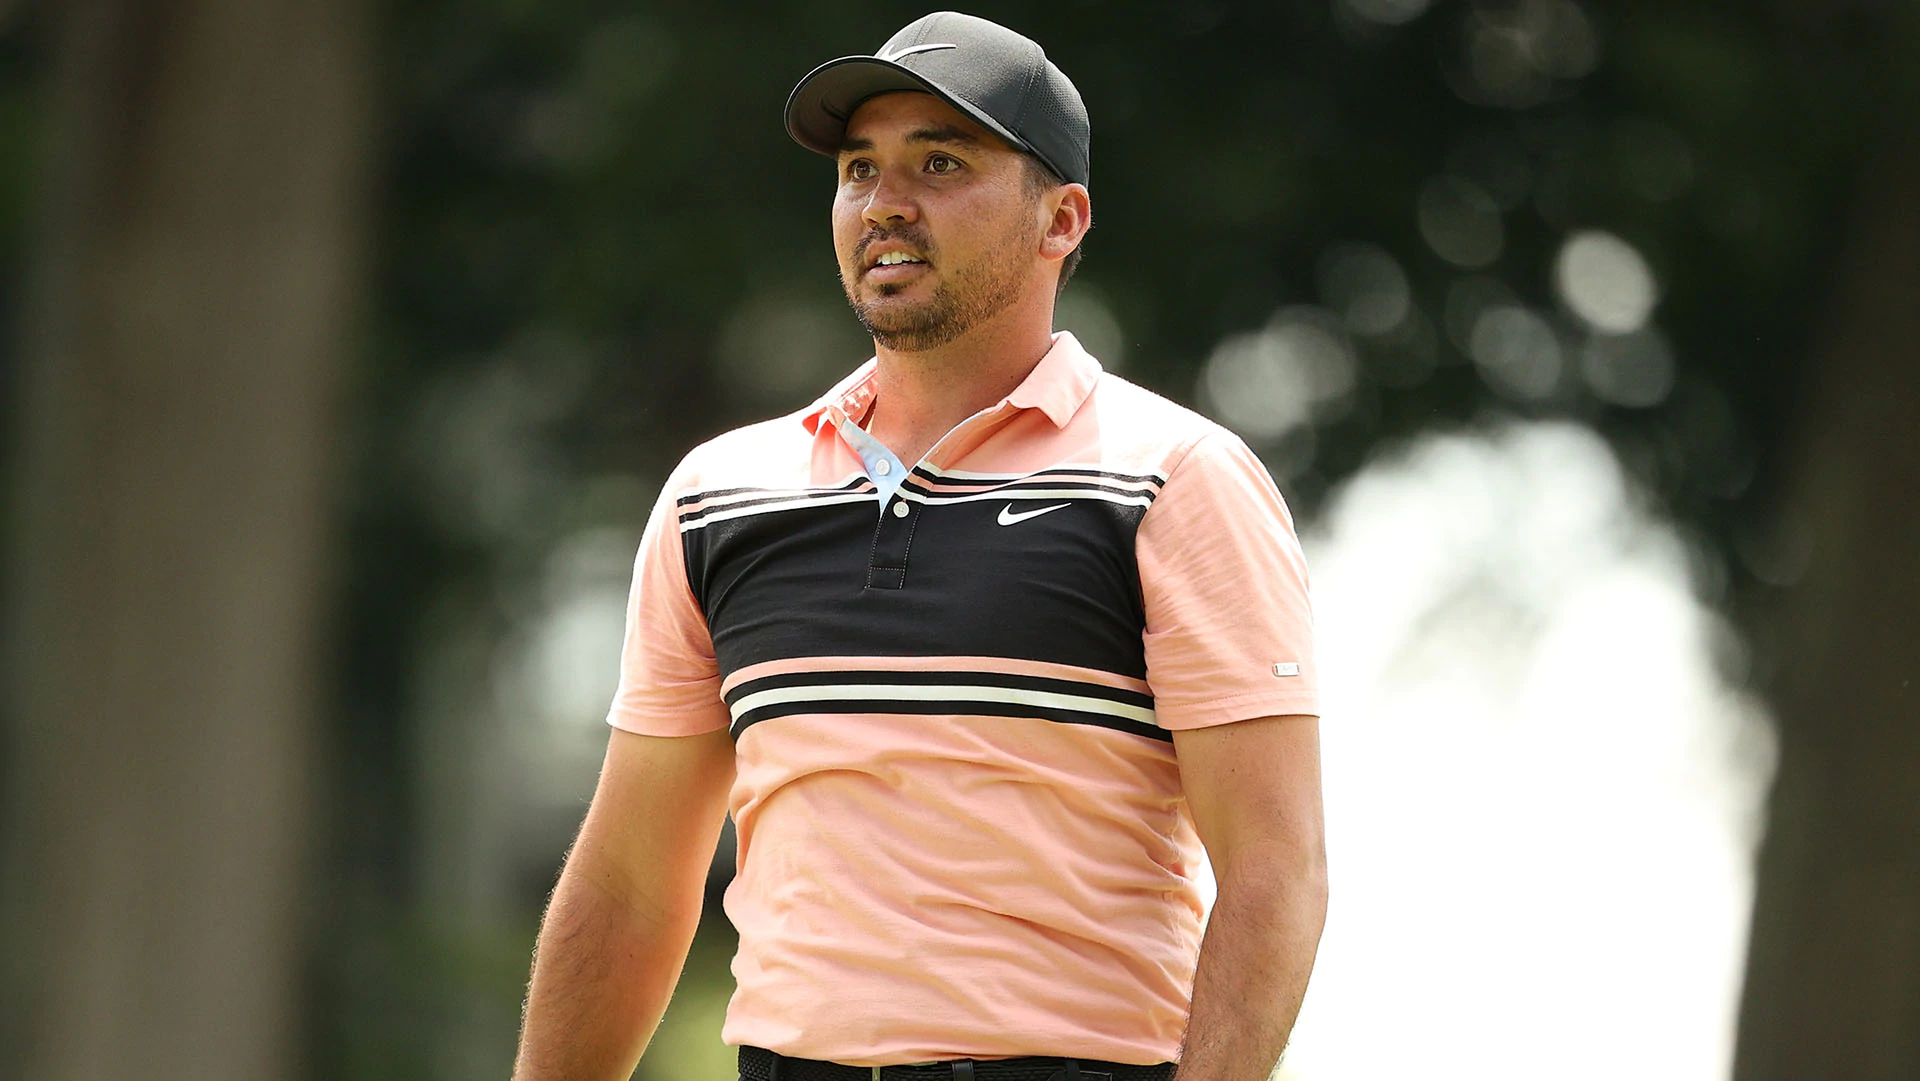 Jason Day to play in single on Travelers Moving Day after requesting COVID-19 test